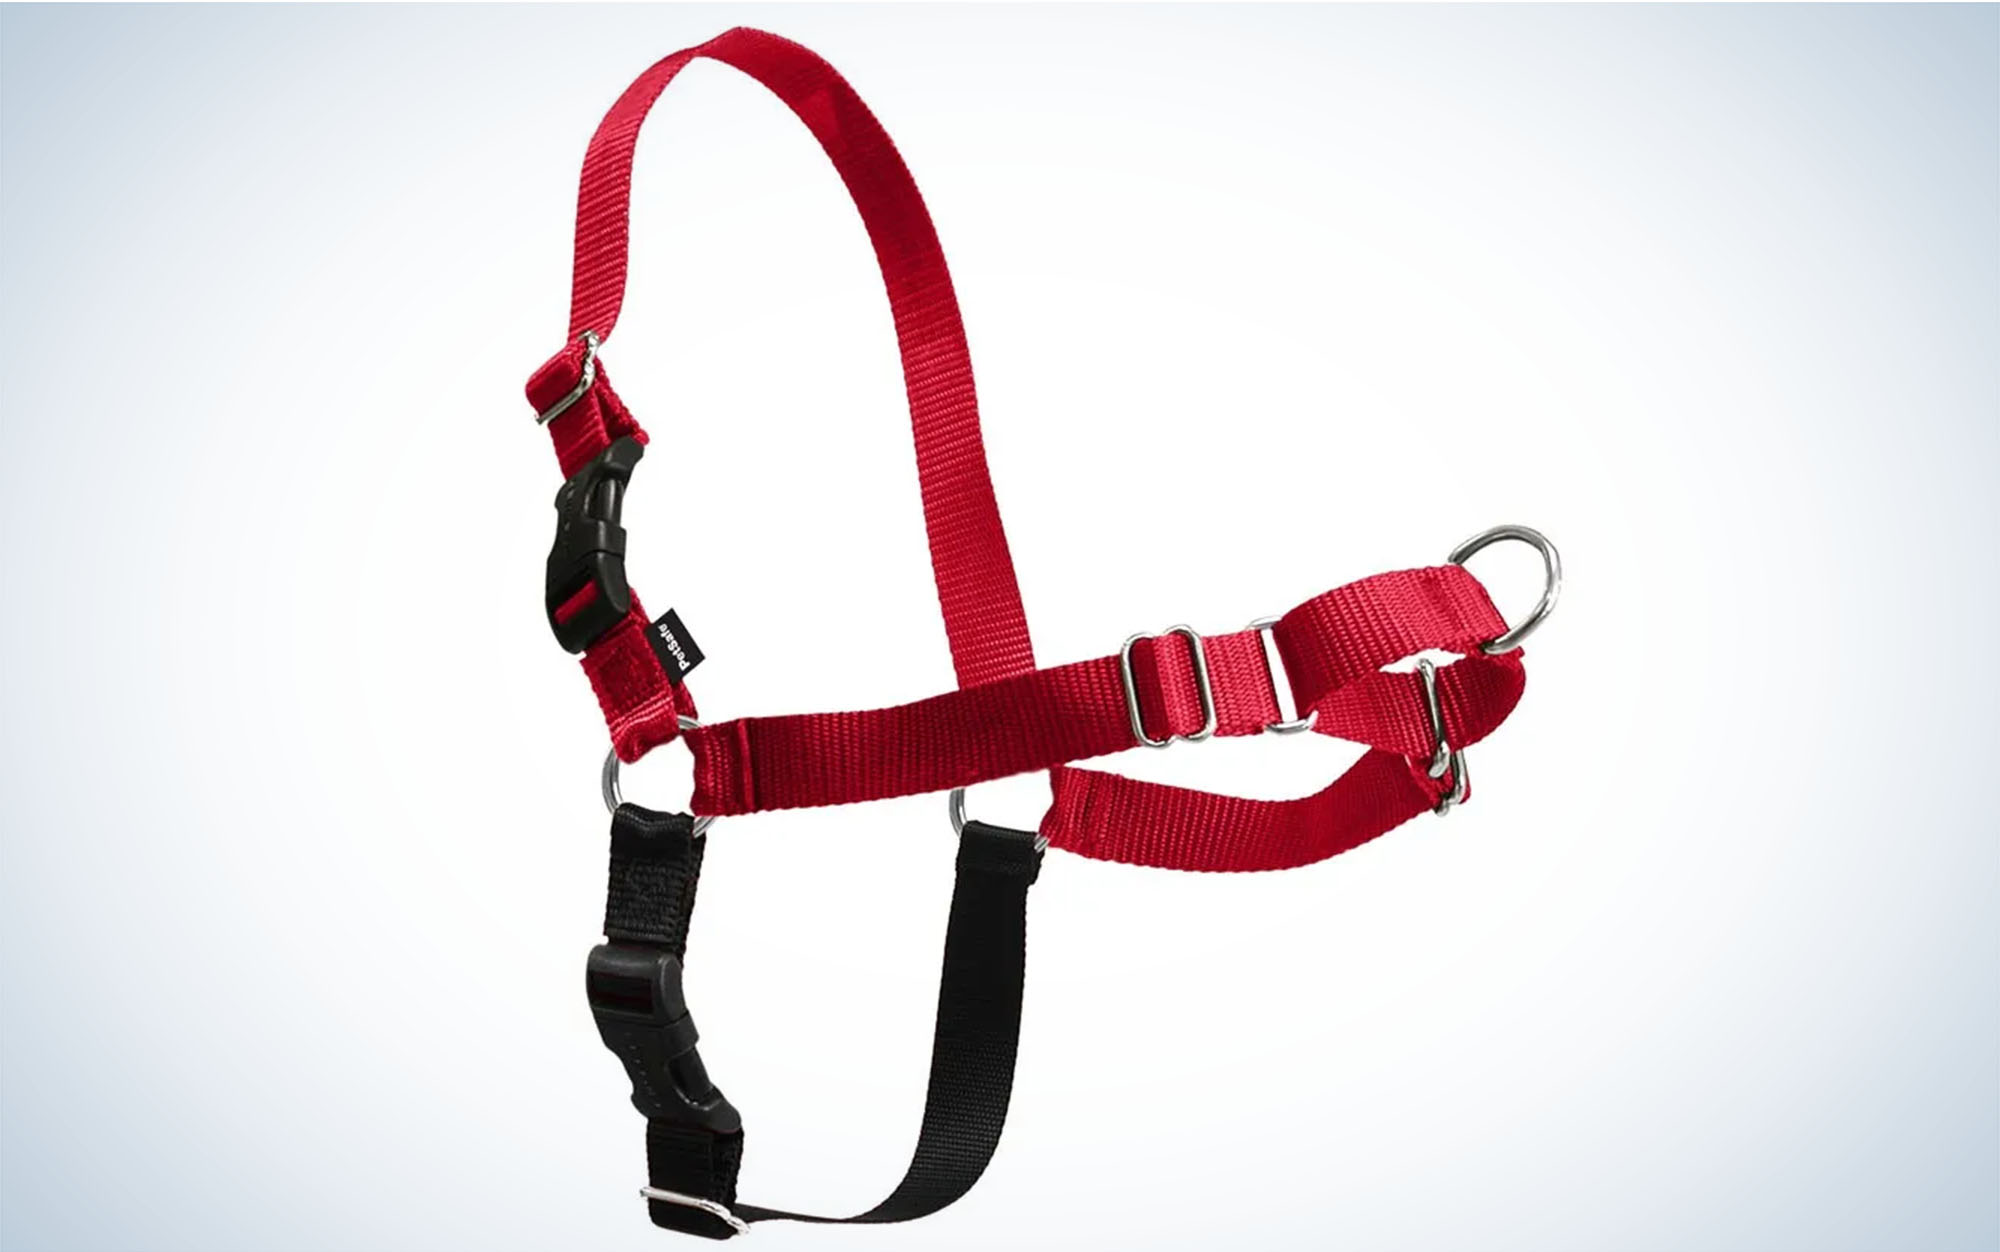 The PetSafe Easy Walk No-Pull Harness is best for pullers.